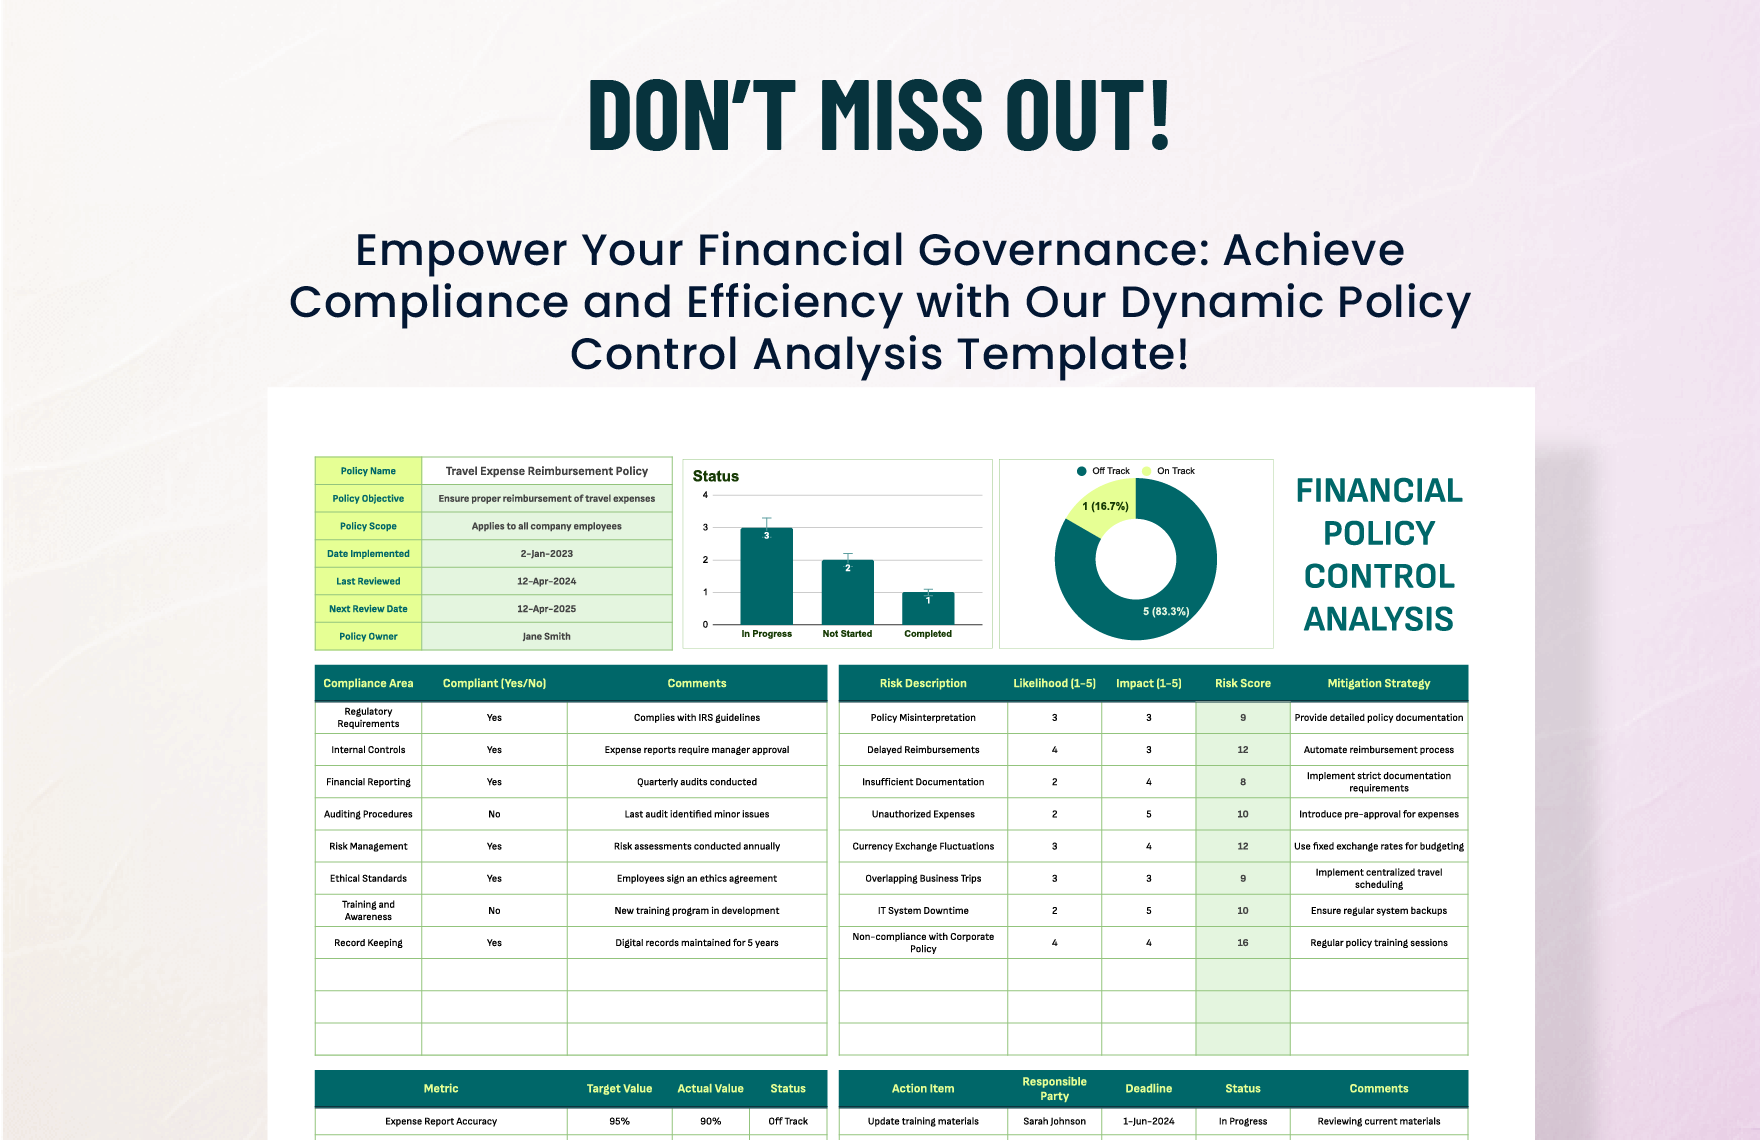 Financial Policy Control Analysis Template